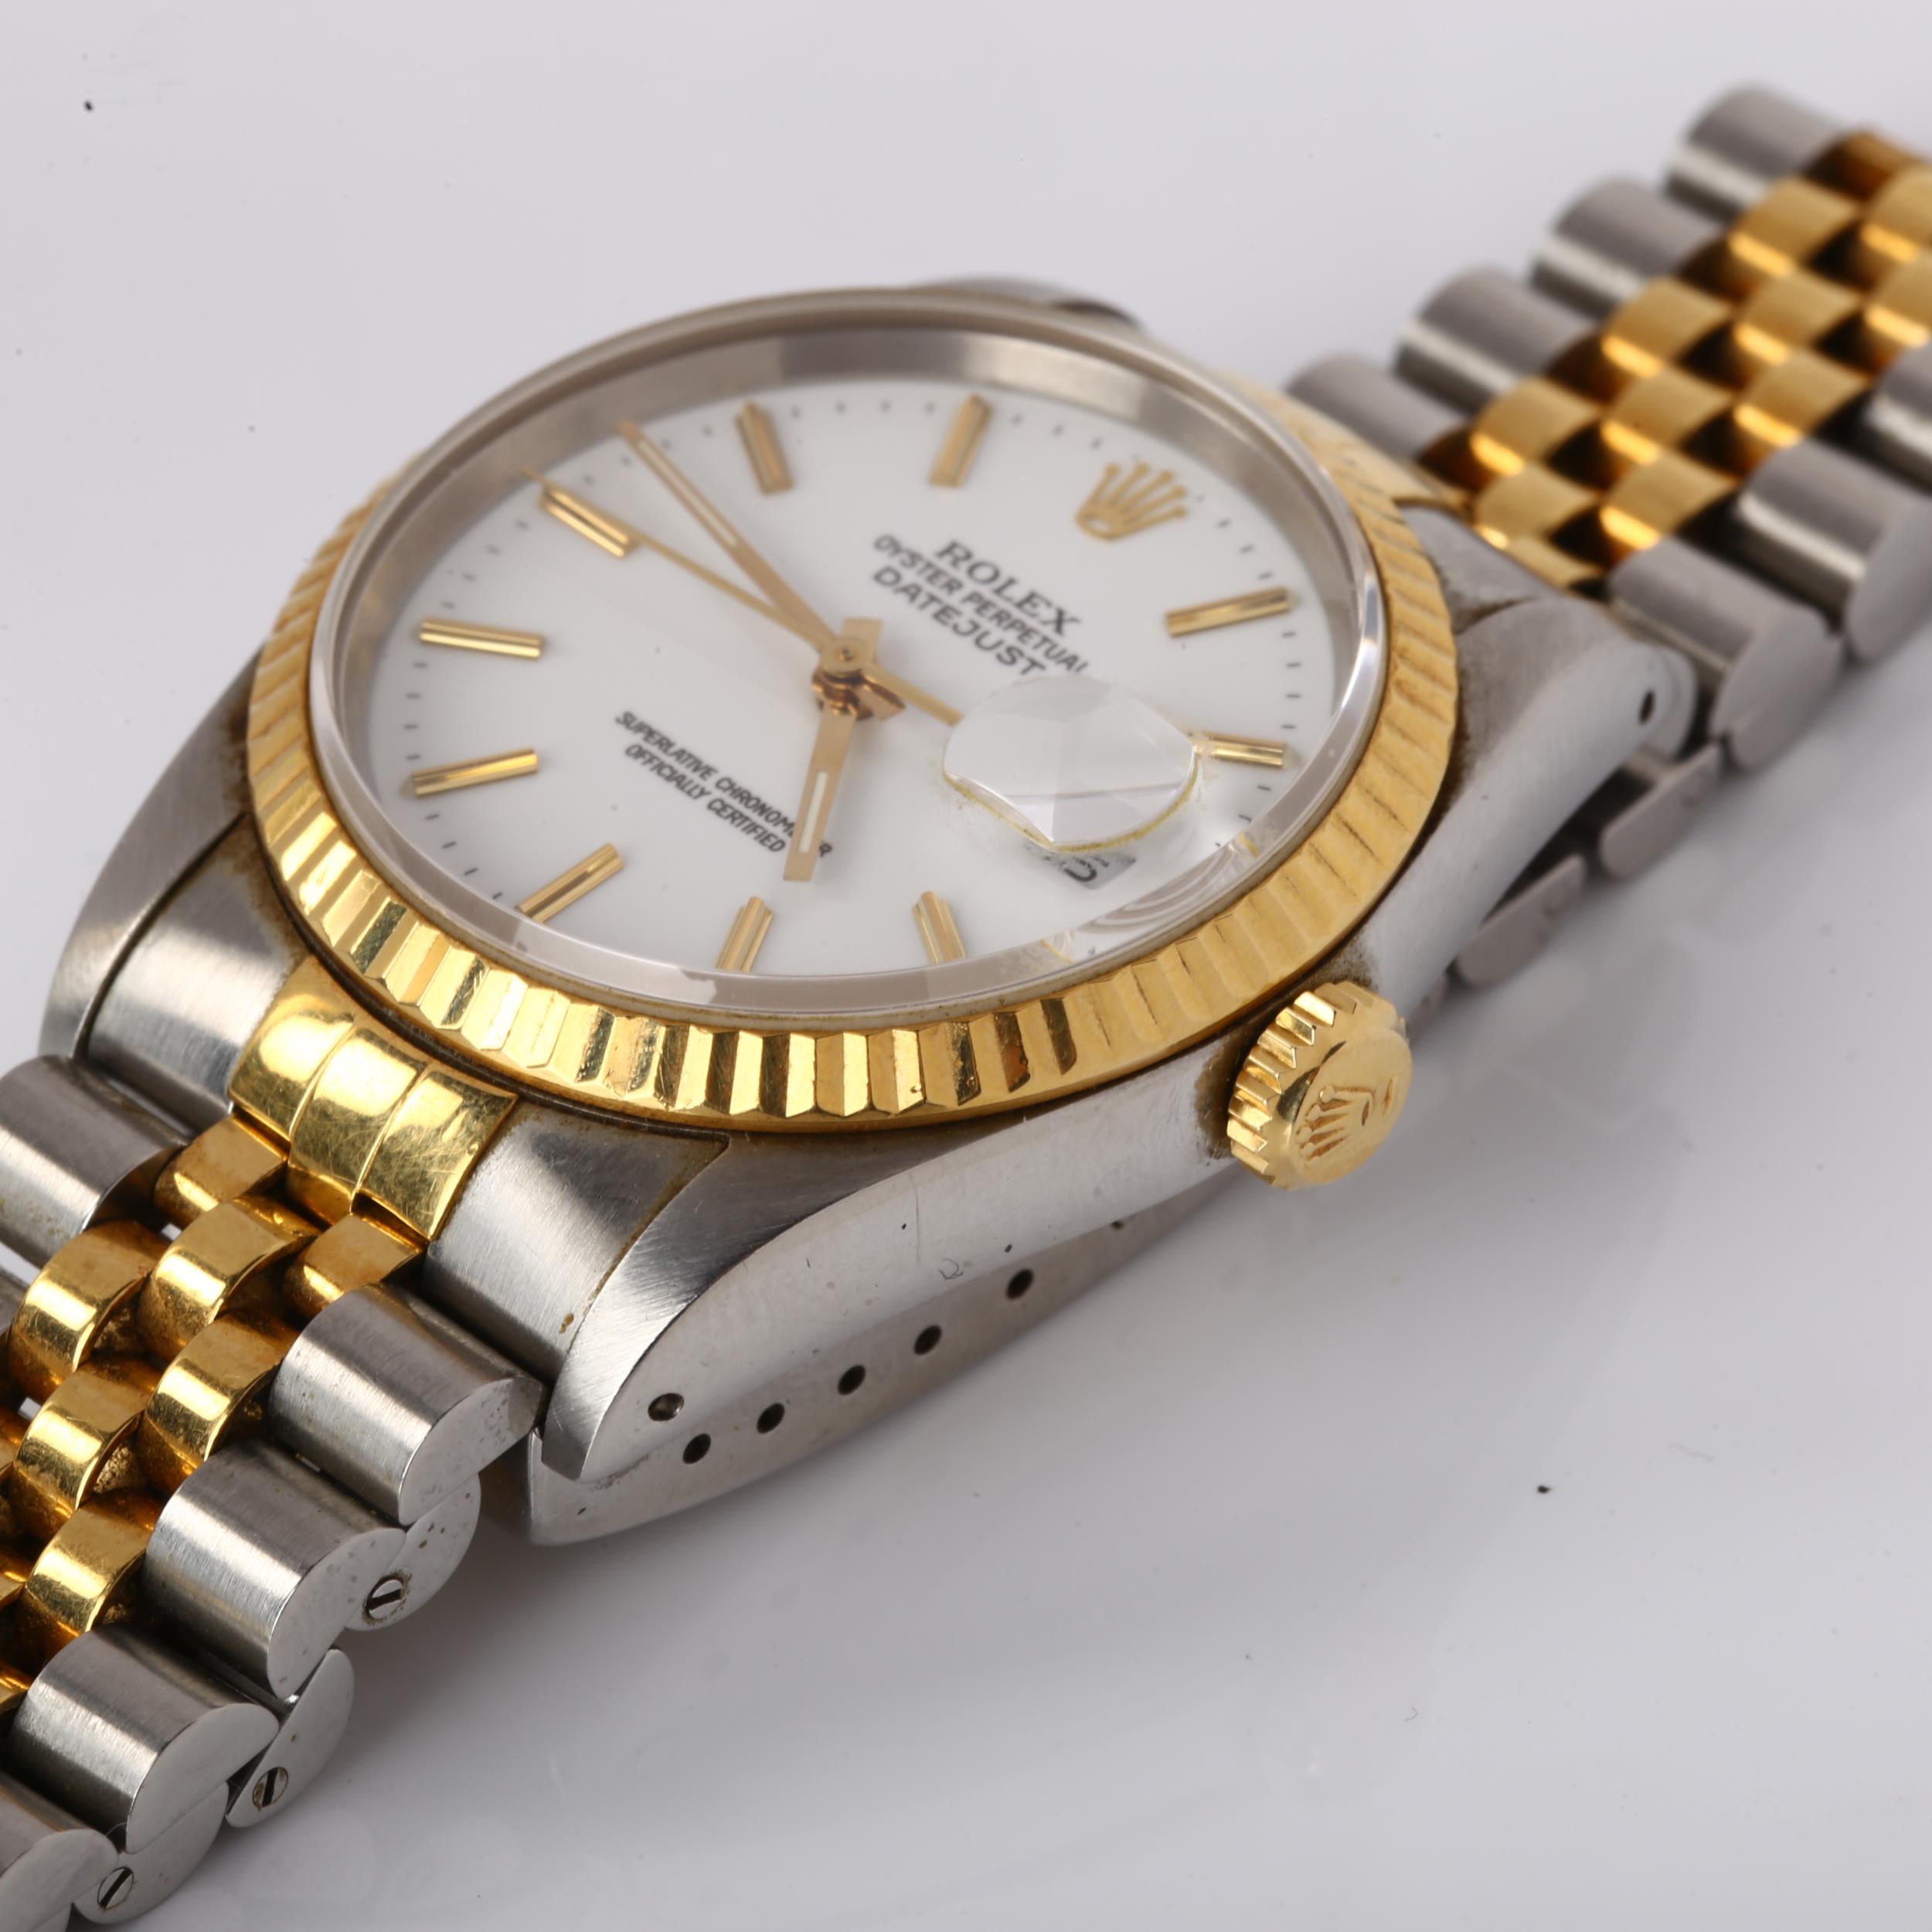 ROLEX - a bi-metal Oyster Perpetual Datejust automatic bracelet watch, ref. 16233, circa 1989, white - Image 3 of 6